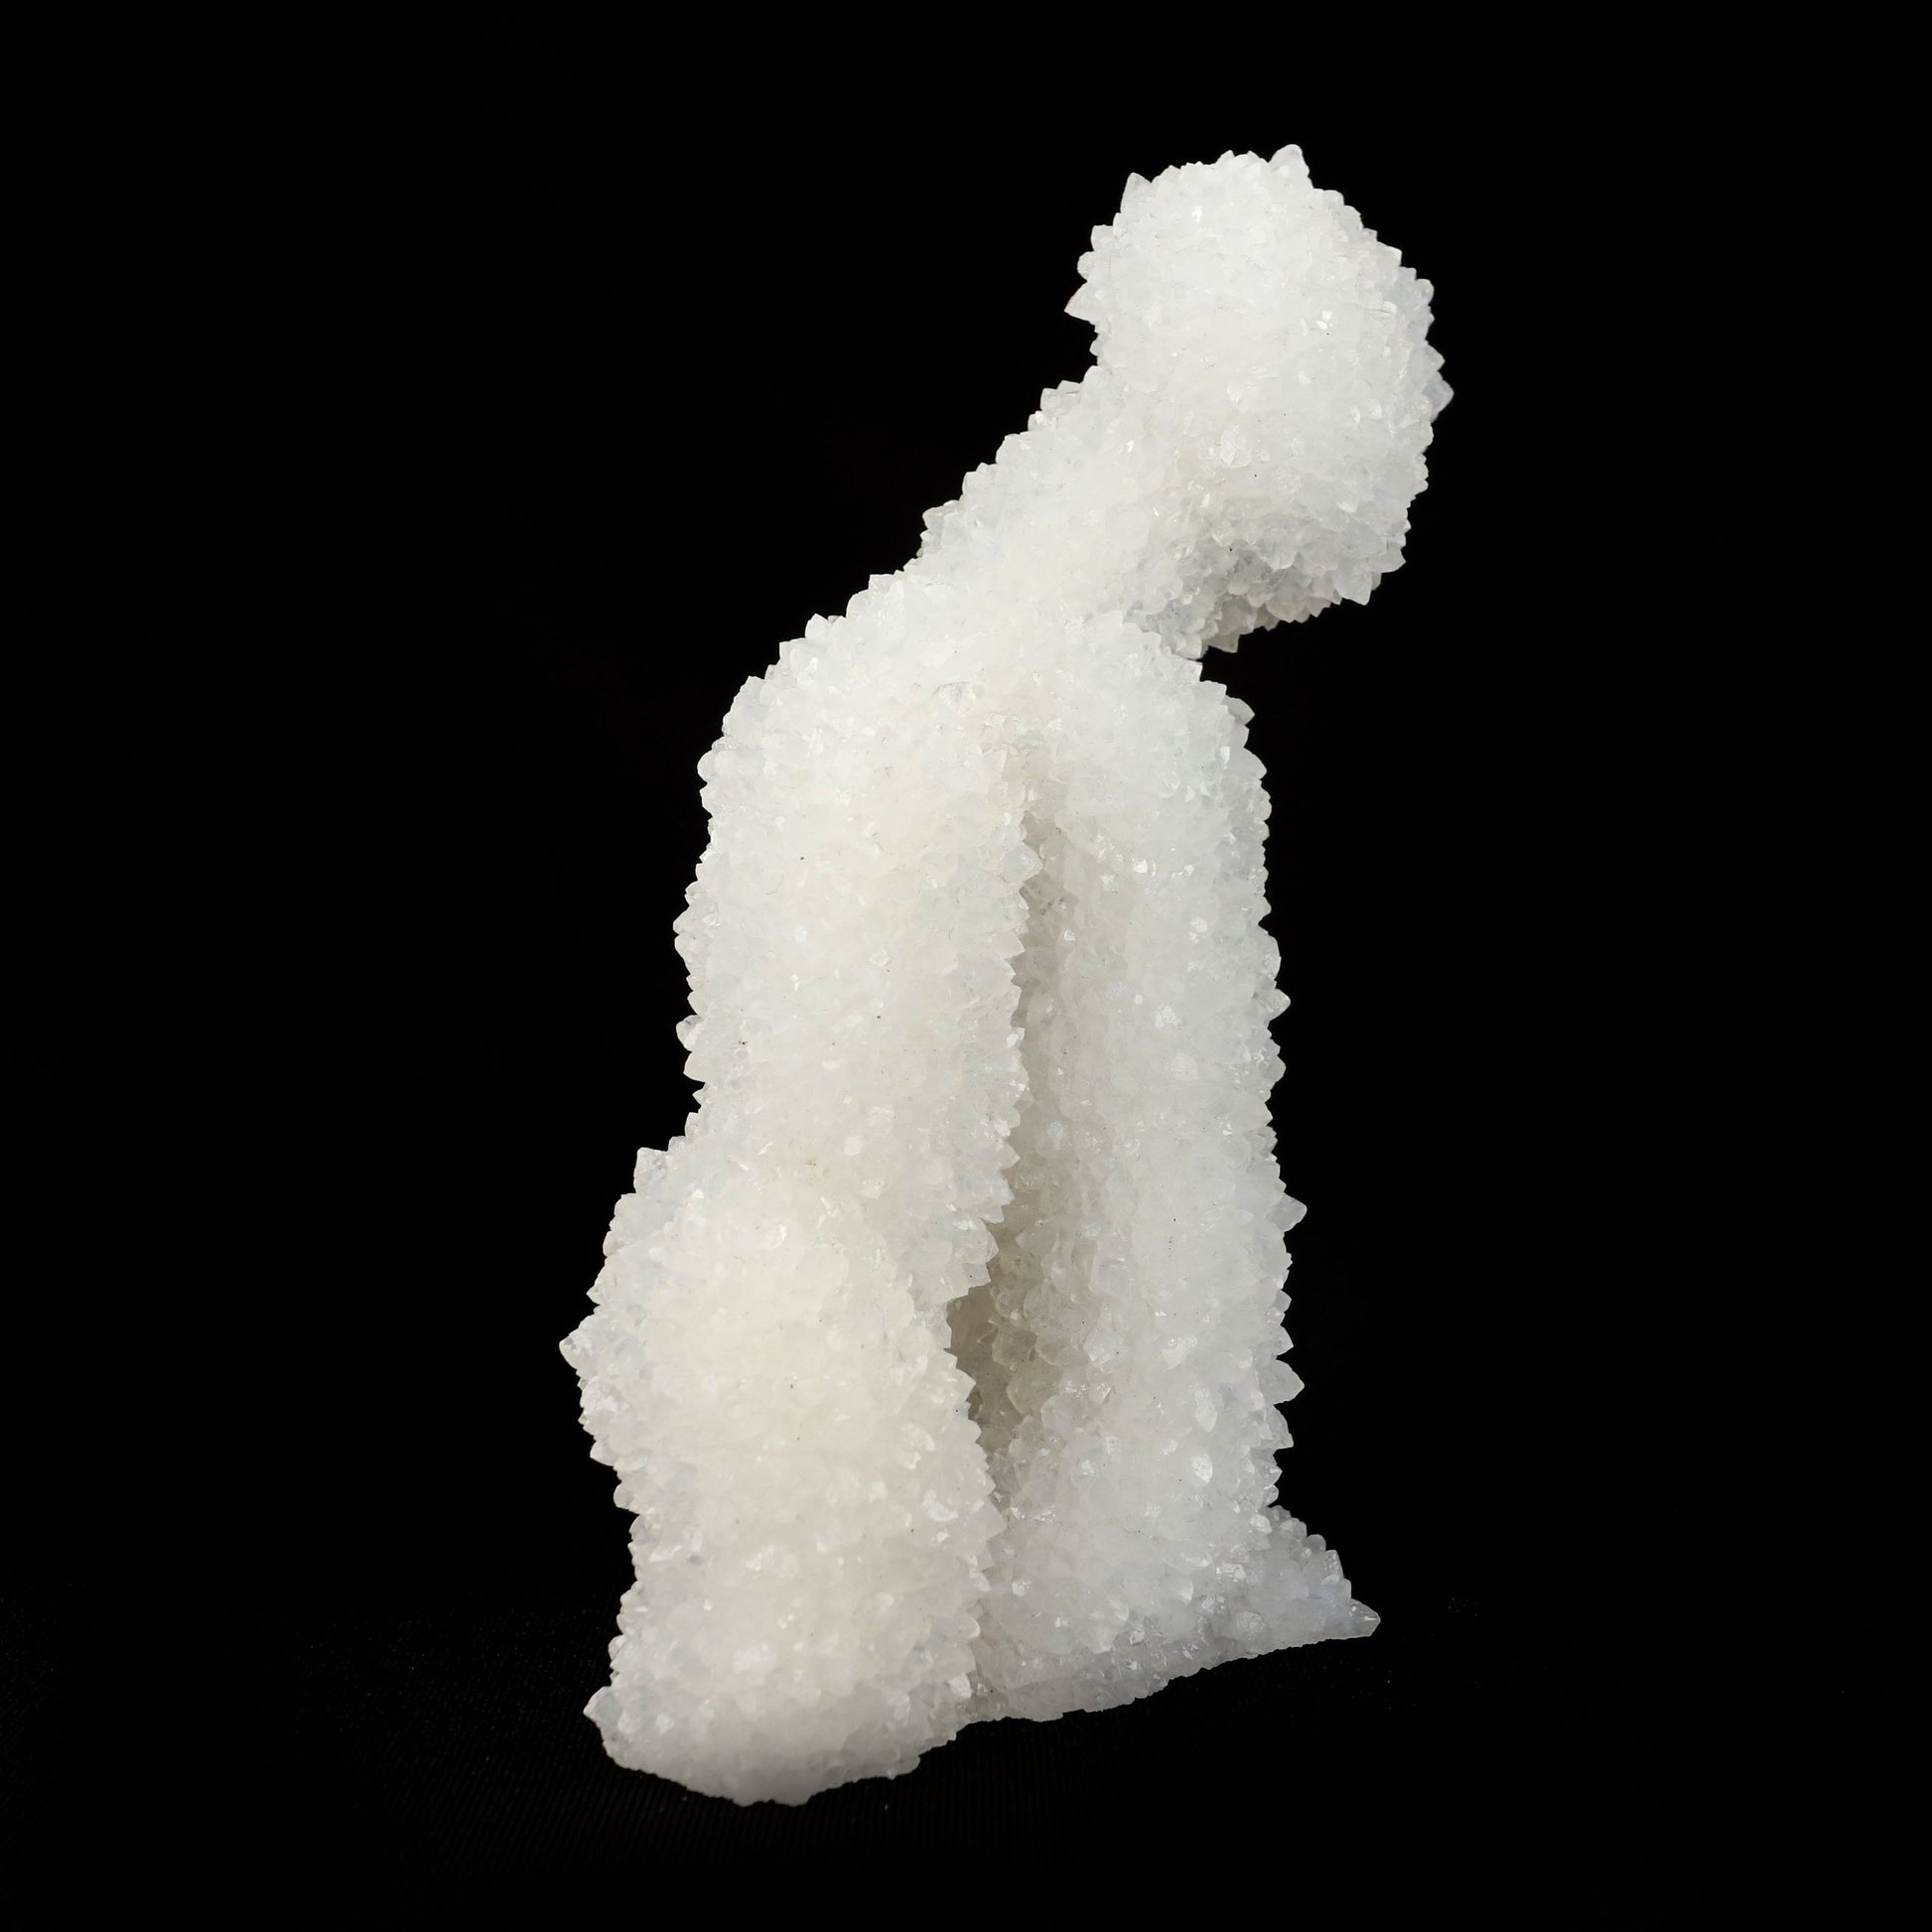 MM Quartz Coral Formation Natural Mineral Specimen # B 4951  https://www.superbminerals.us/products/mm-quartz-coral-formation-natural-mineral-specimen-b-4951  Features:The specimen is filled with drusy milky Quartz which has created pseudomorphs after scalenohedral Calcite crystals.The item is crystallised nearly all the way around with no matrix, and only a few small places of connection